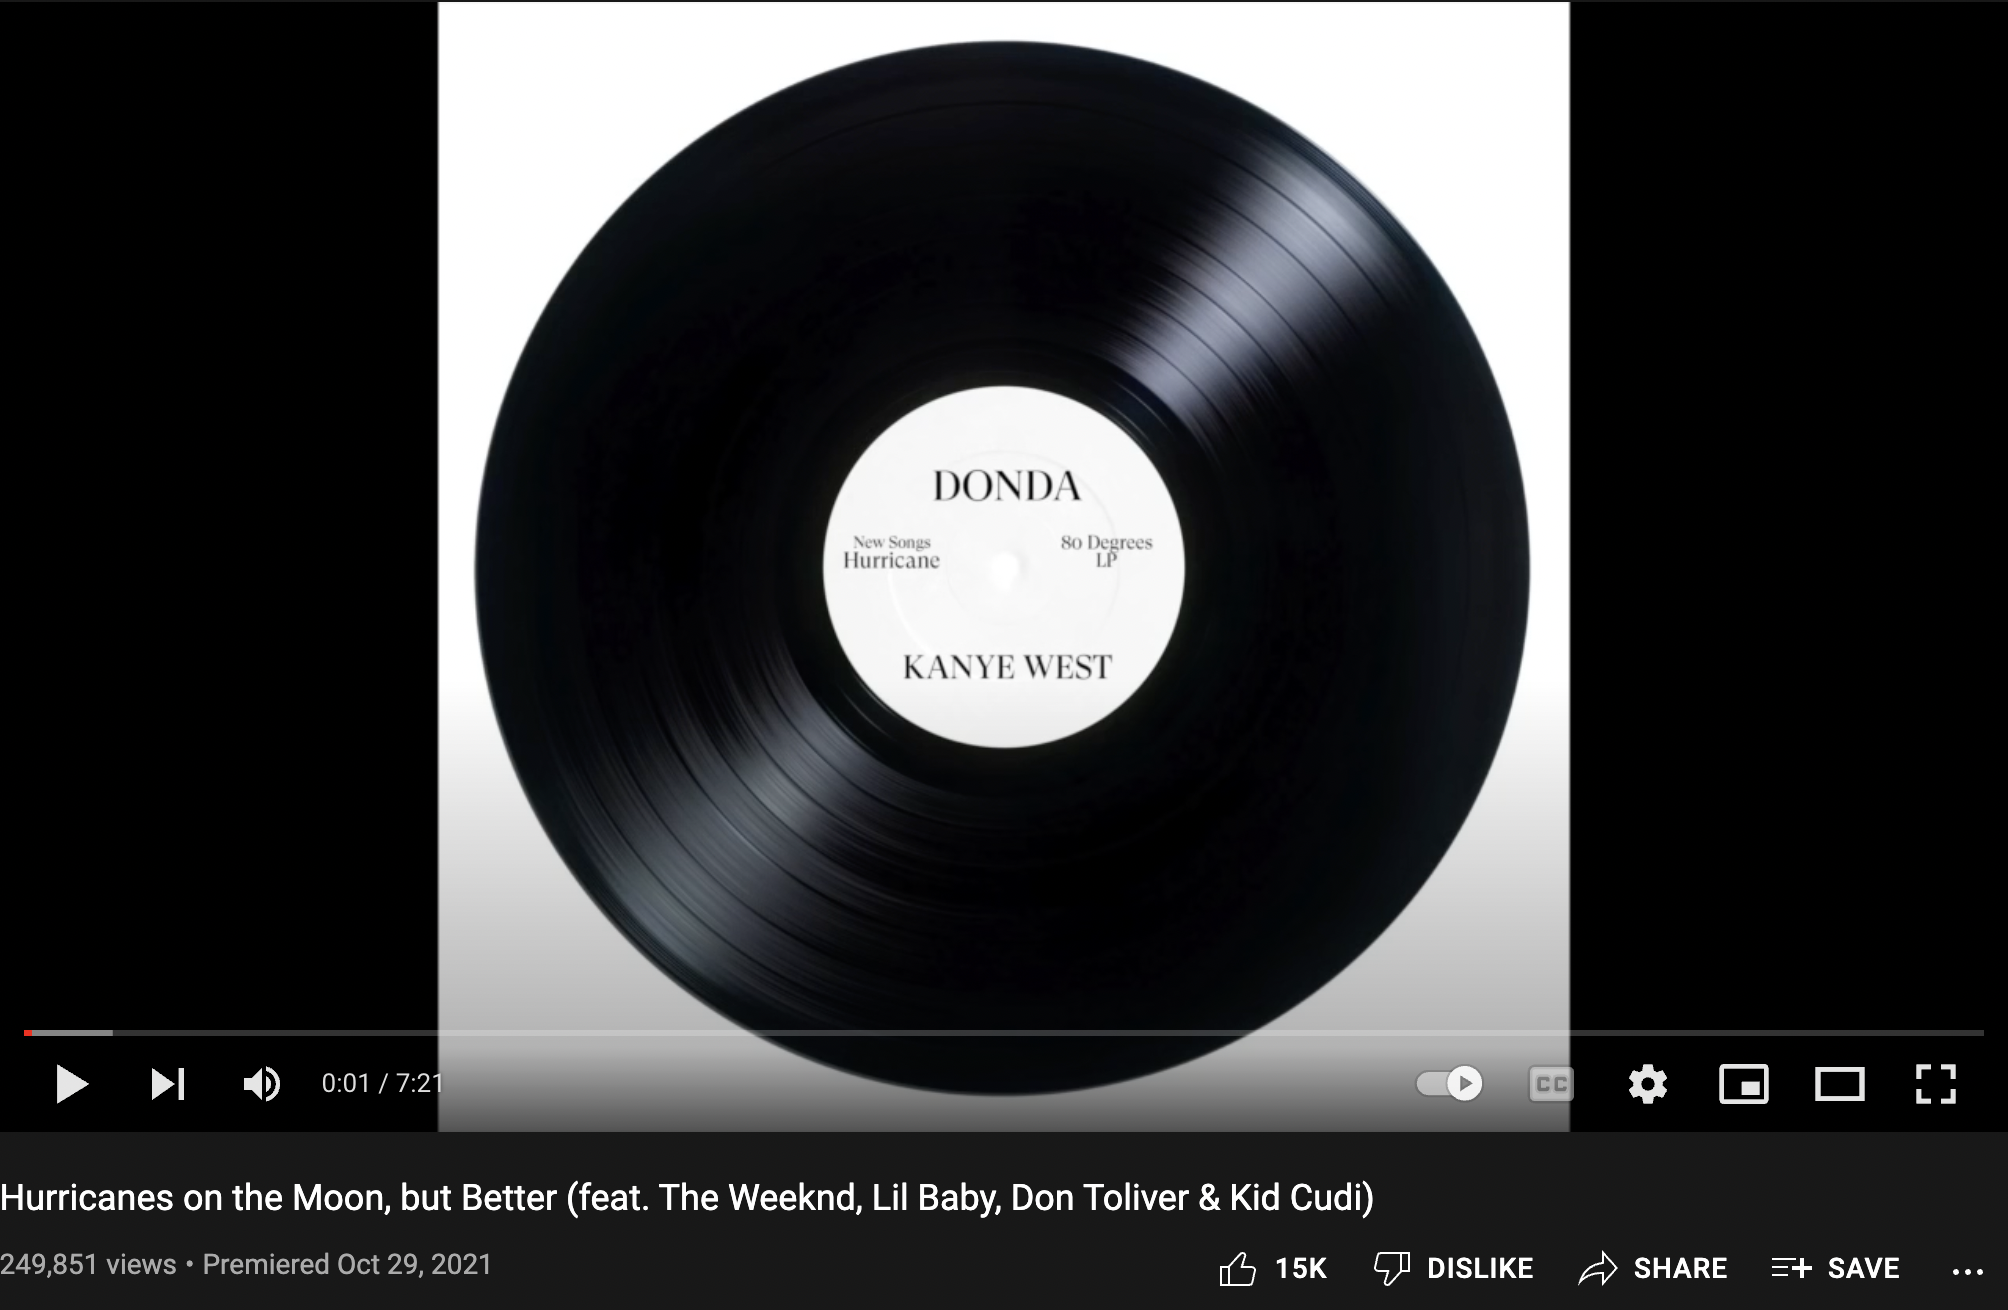 An amazing contribution to the DONDA meme ecosystem - The Donda Project